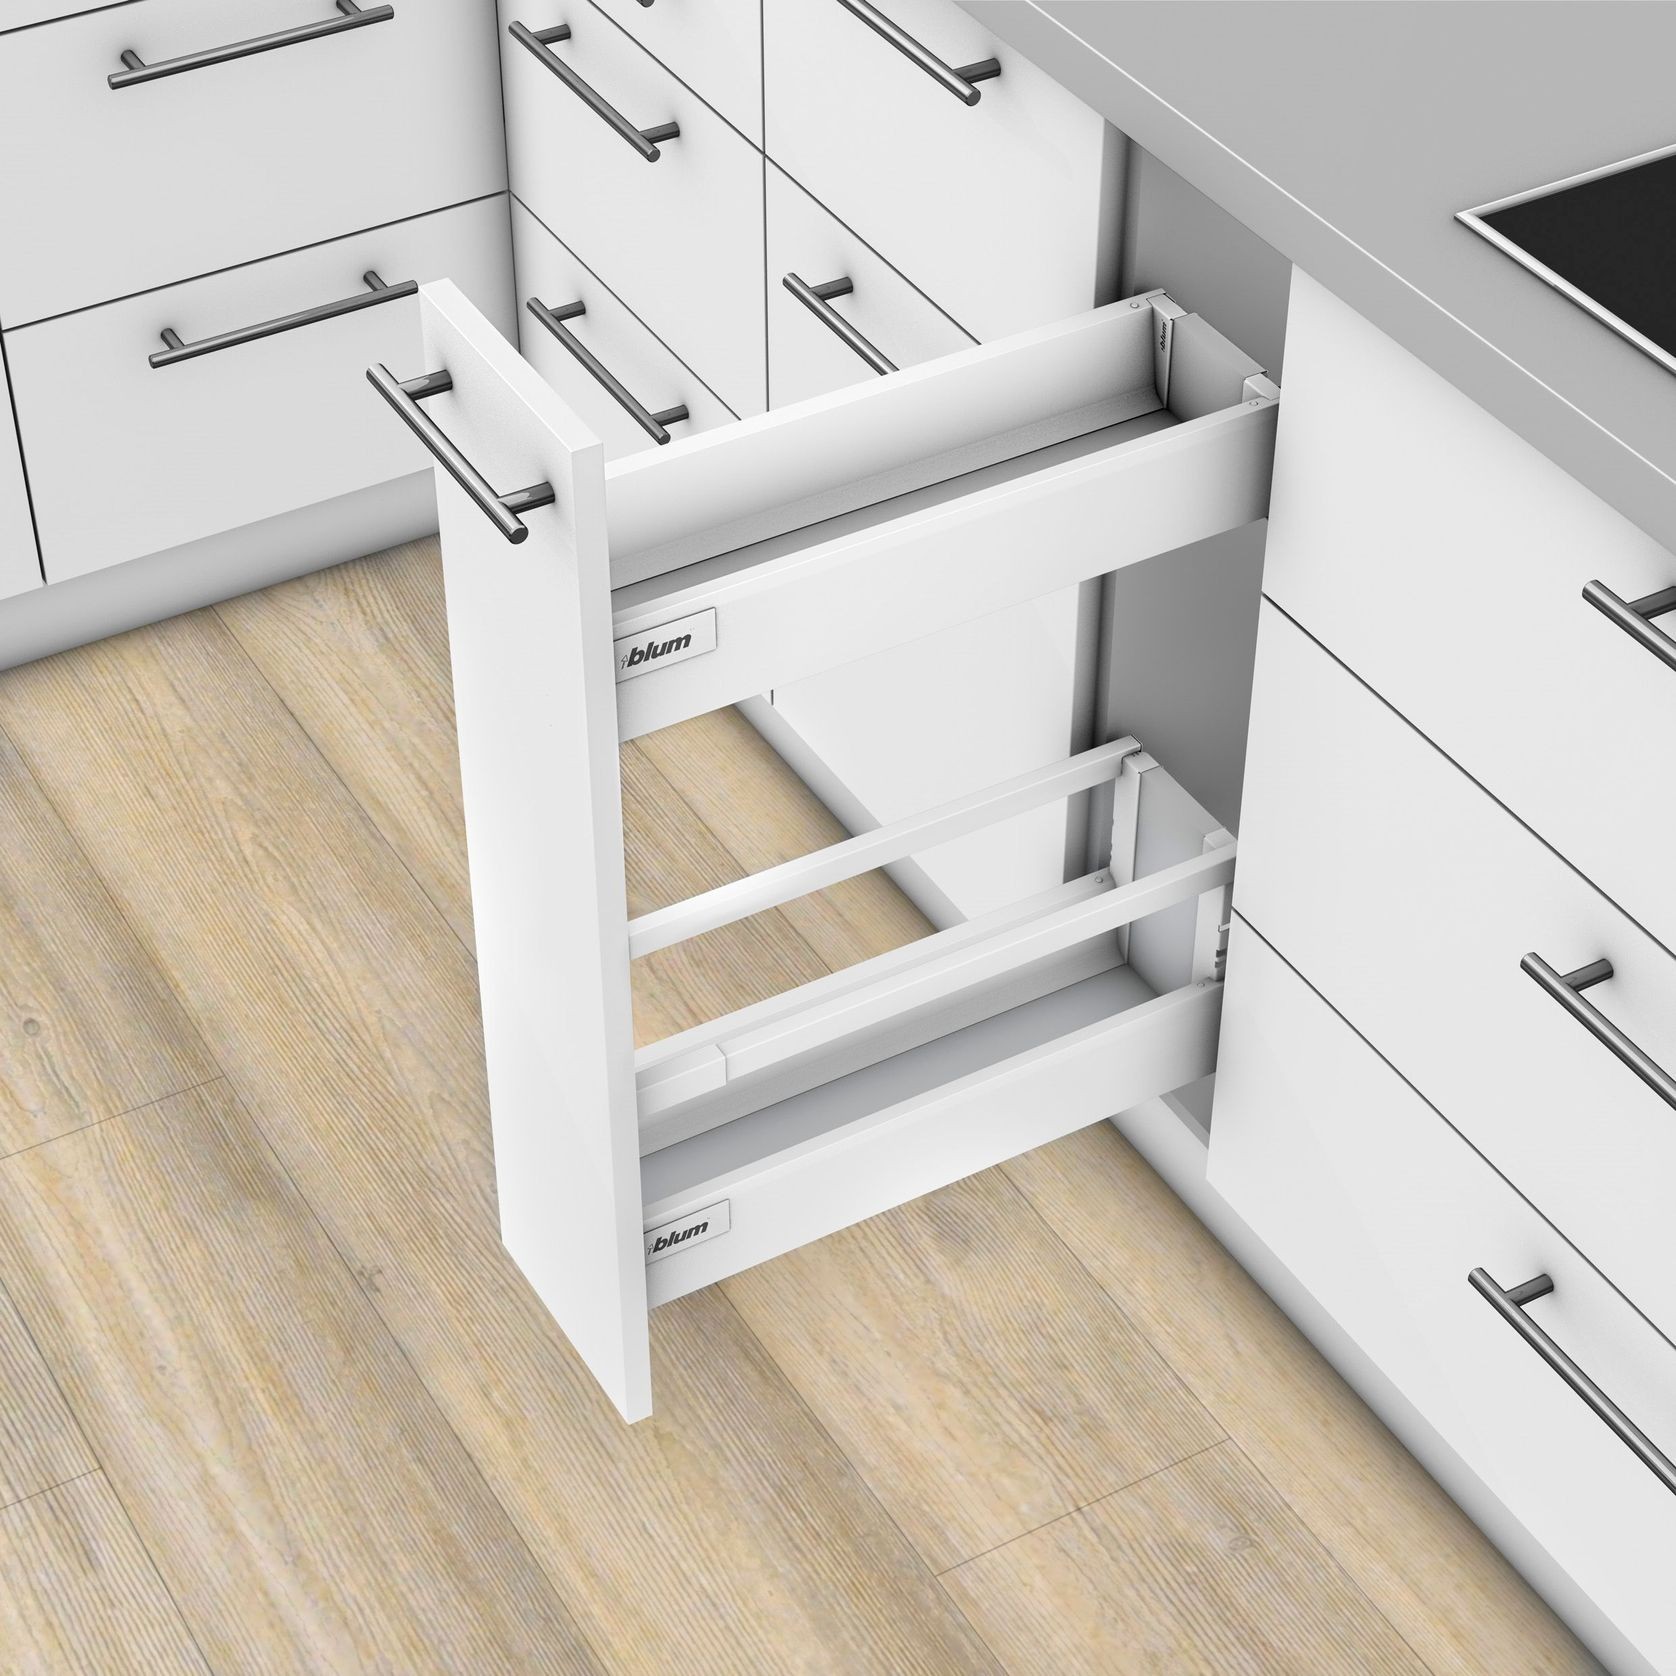 SPACE TWIN narrow cabinet solution gallery detail image